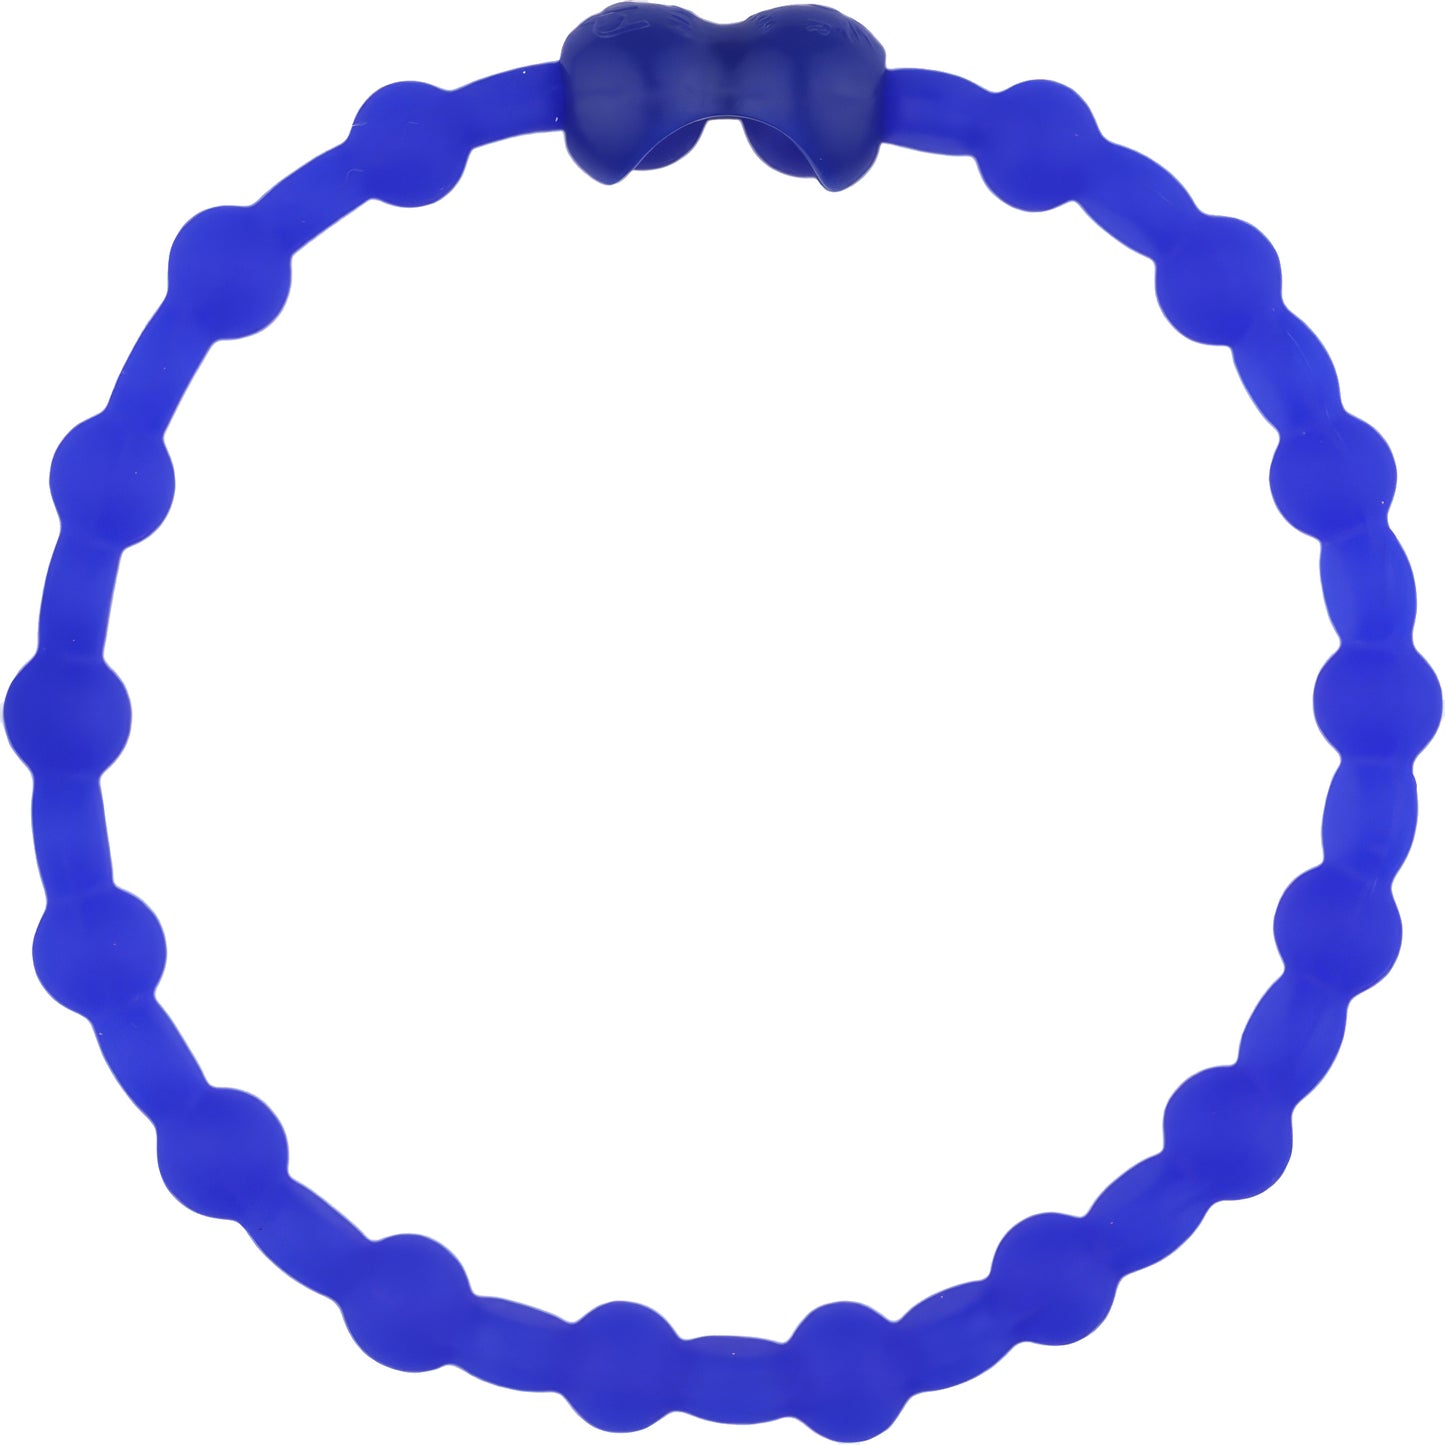 Sapphire Serenity Pack PRO Hair Ties (4-Pack): Embrace Tranquility in Shades of Blue